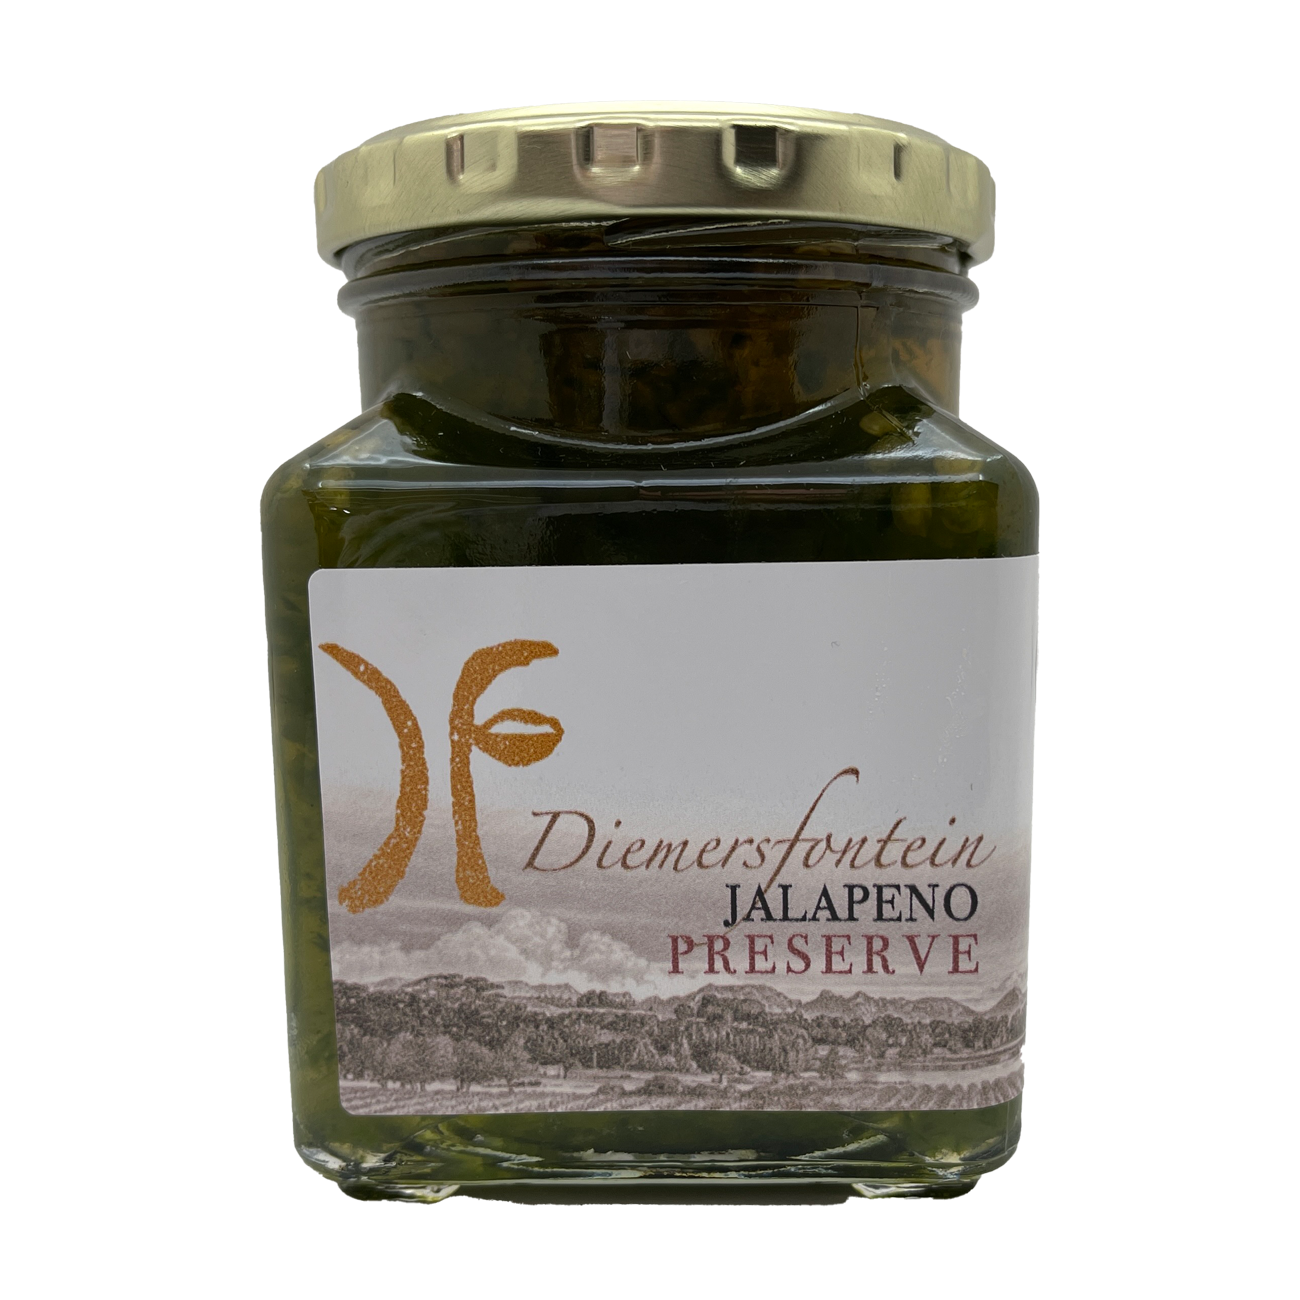 Featured image for “JALAPENO PRESERVE”